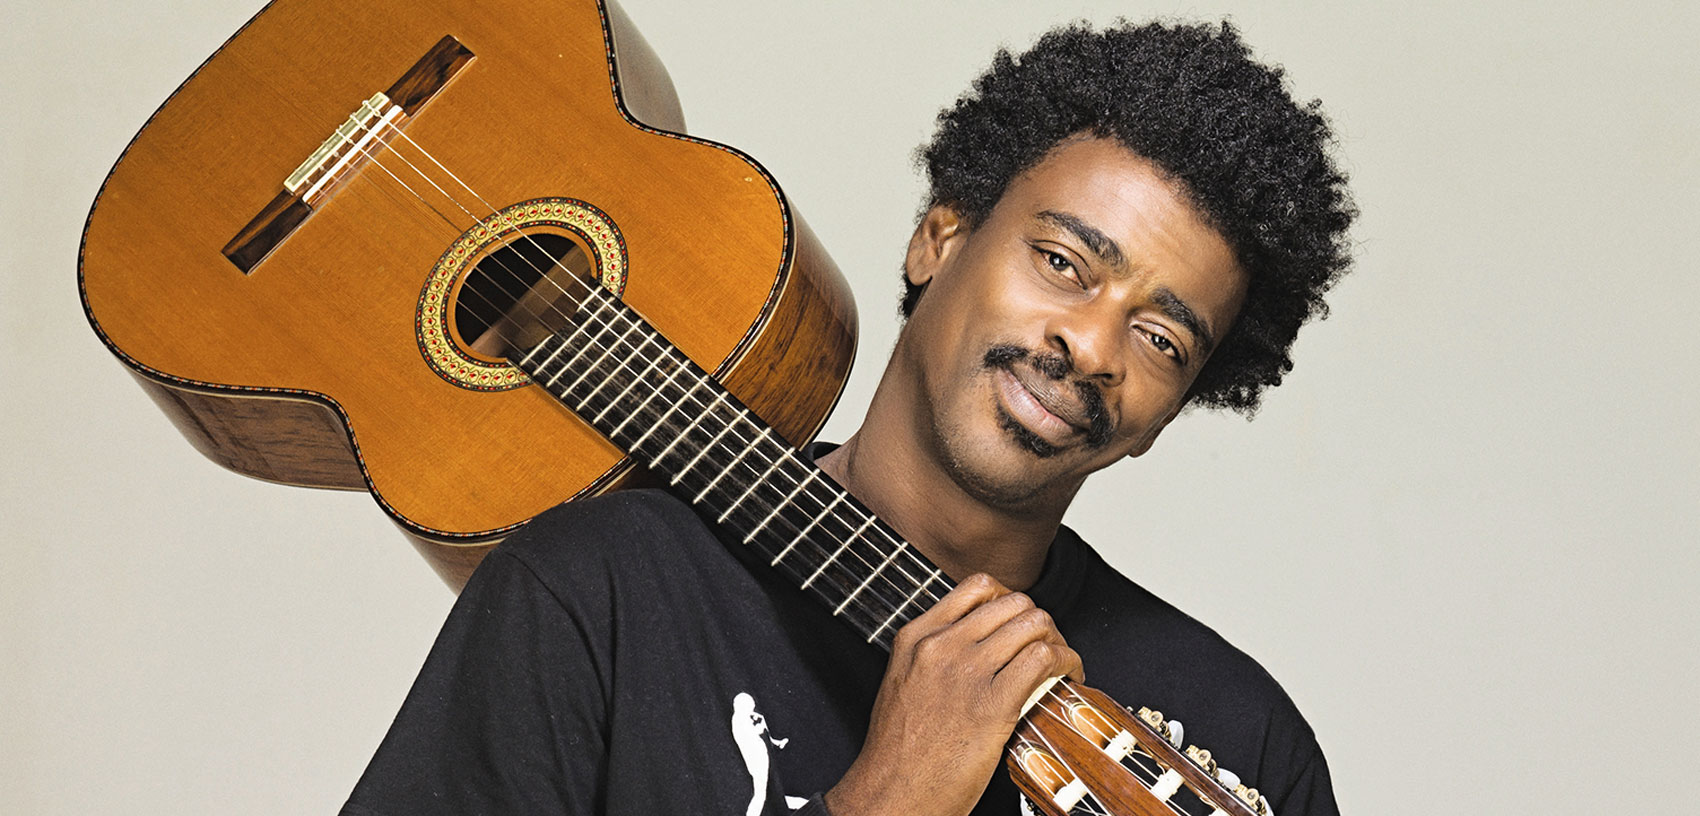 Man with an afro smiling as he balances an acoustic guitar on his shoulder.